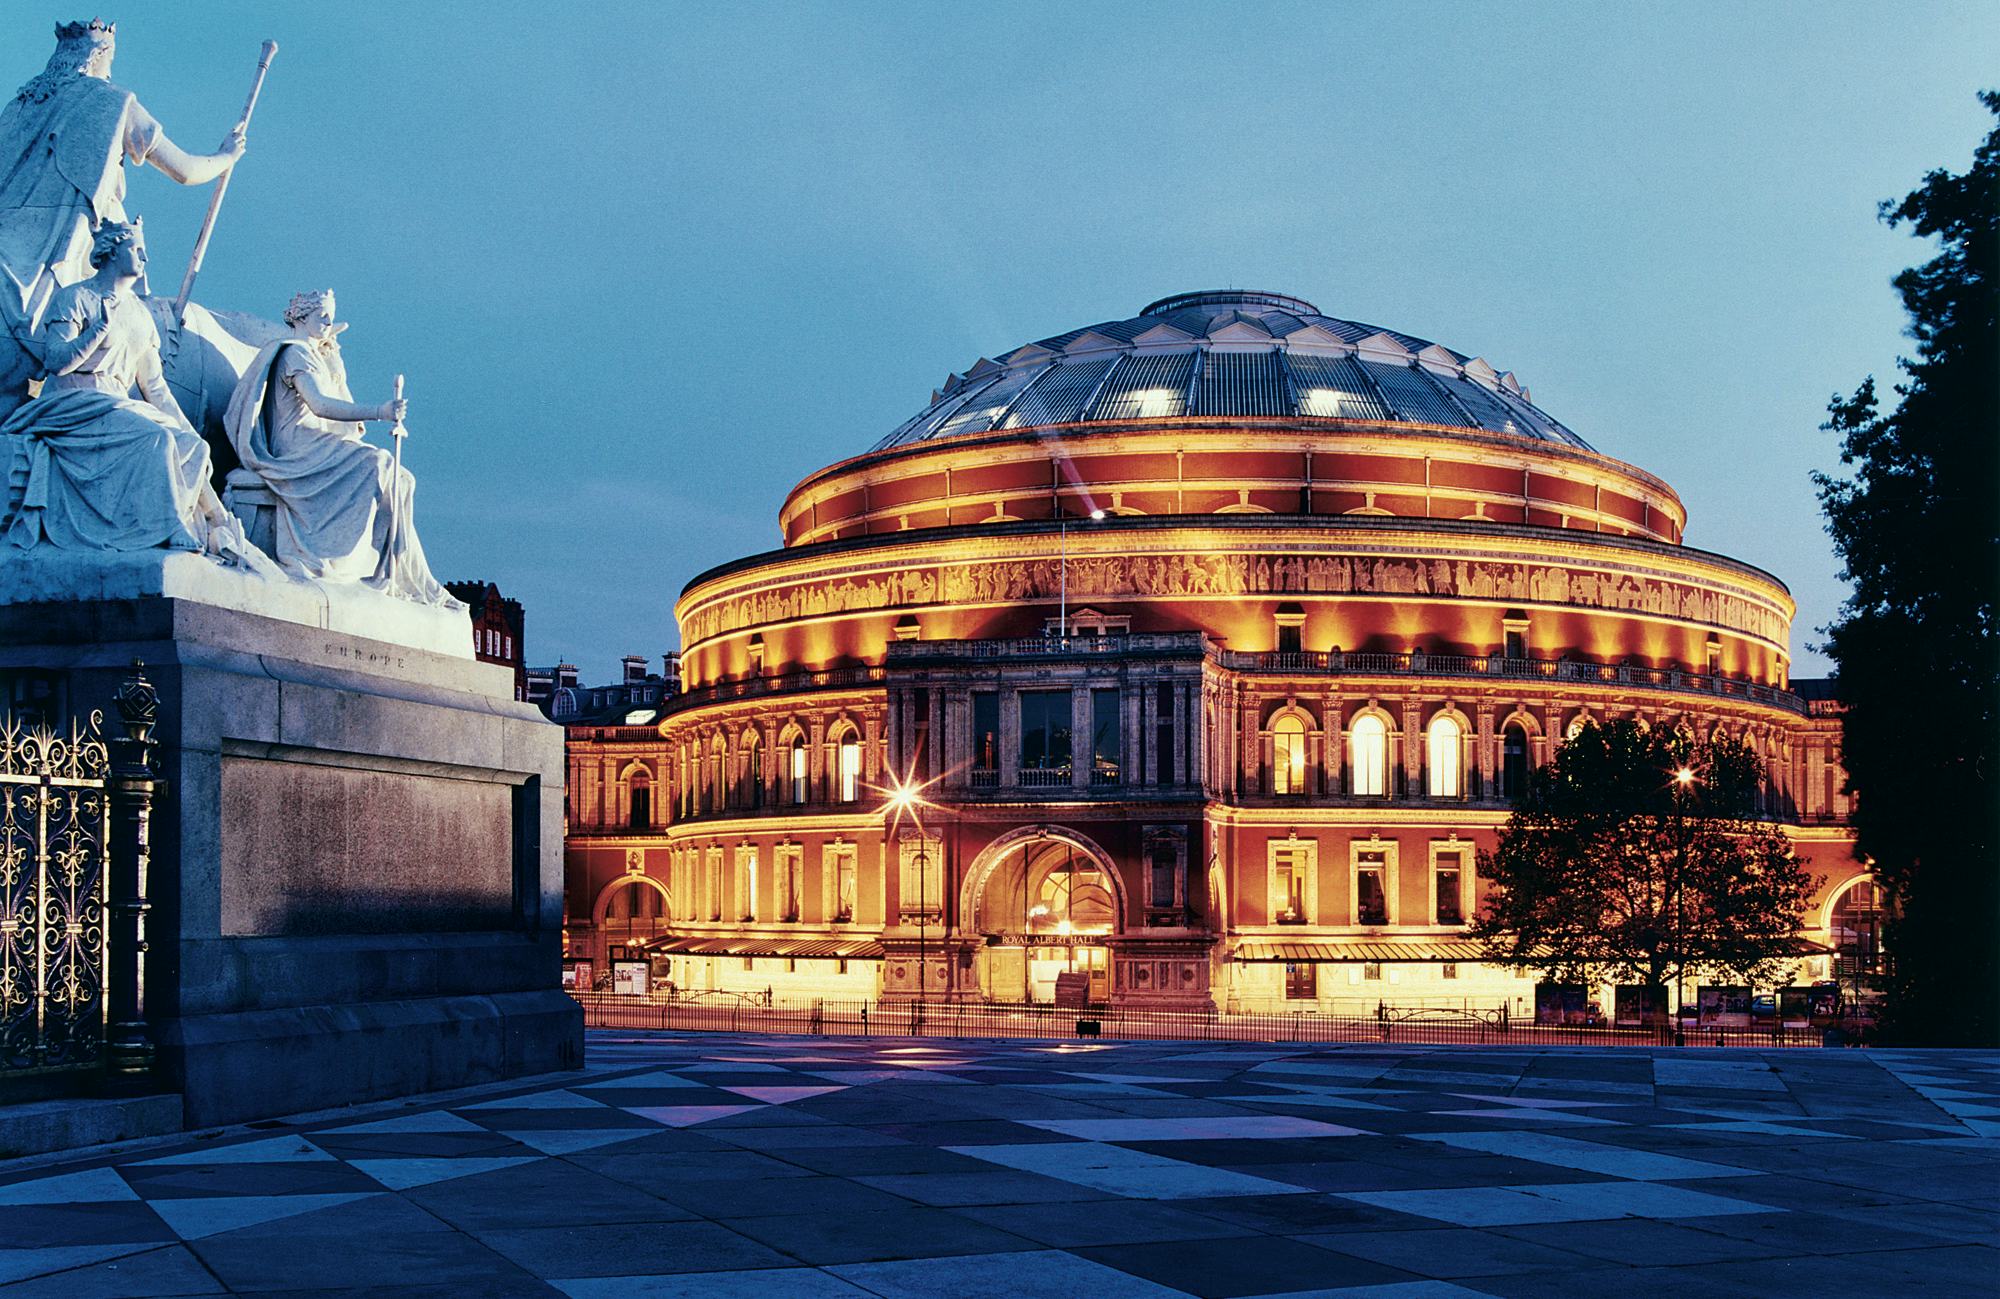 Royal Albert Hall west london concert hall live music comedy legendary venues meetings dining venue hire events hospitality exterior